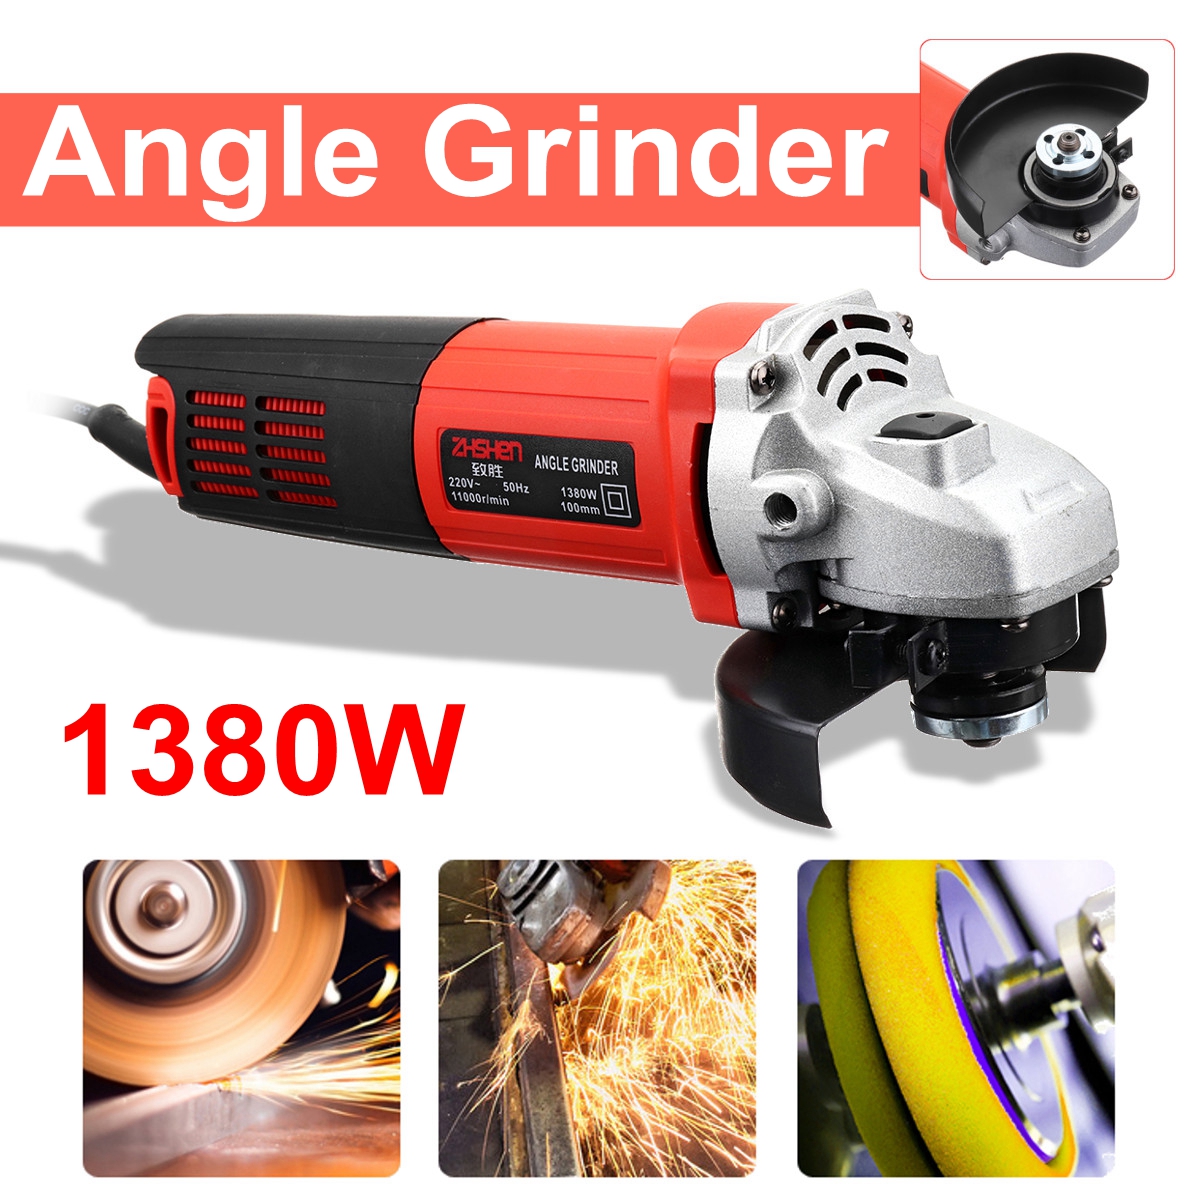 220V/50Hz 1380W 11000r/min Angle Grinder Electric Angle Grinding Cutter Cut Off Power Tool